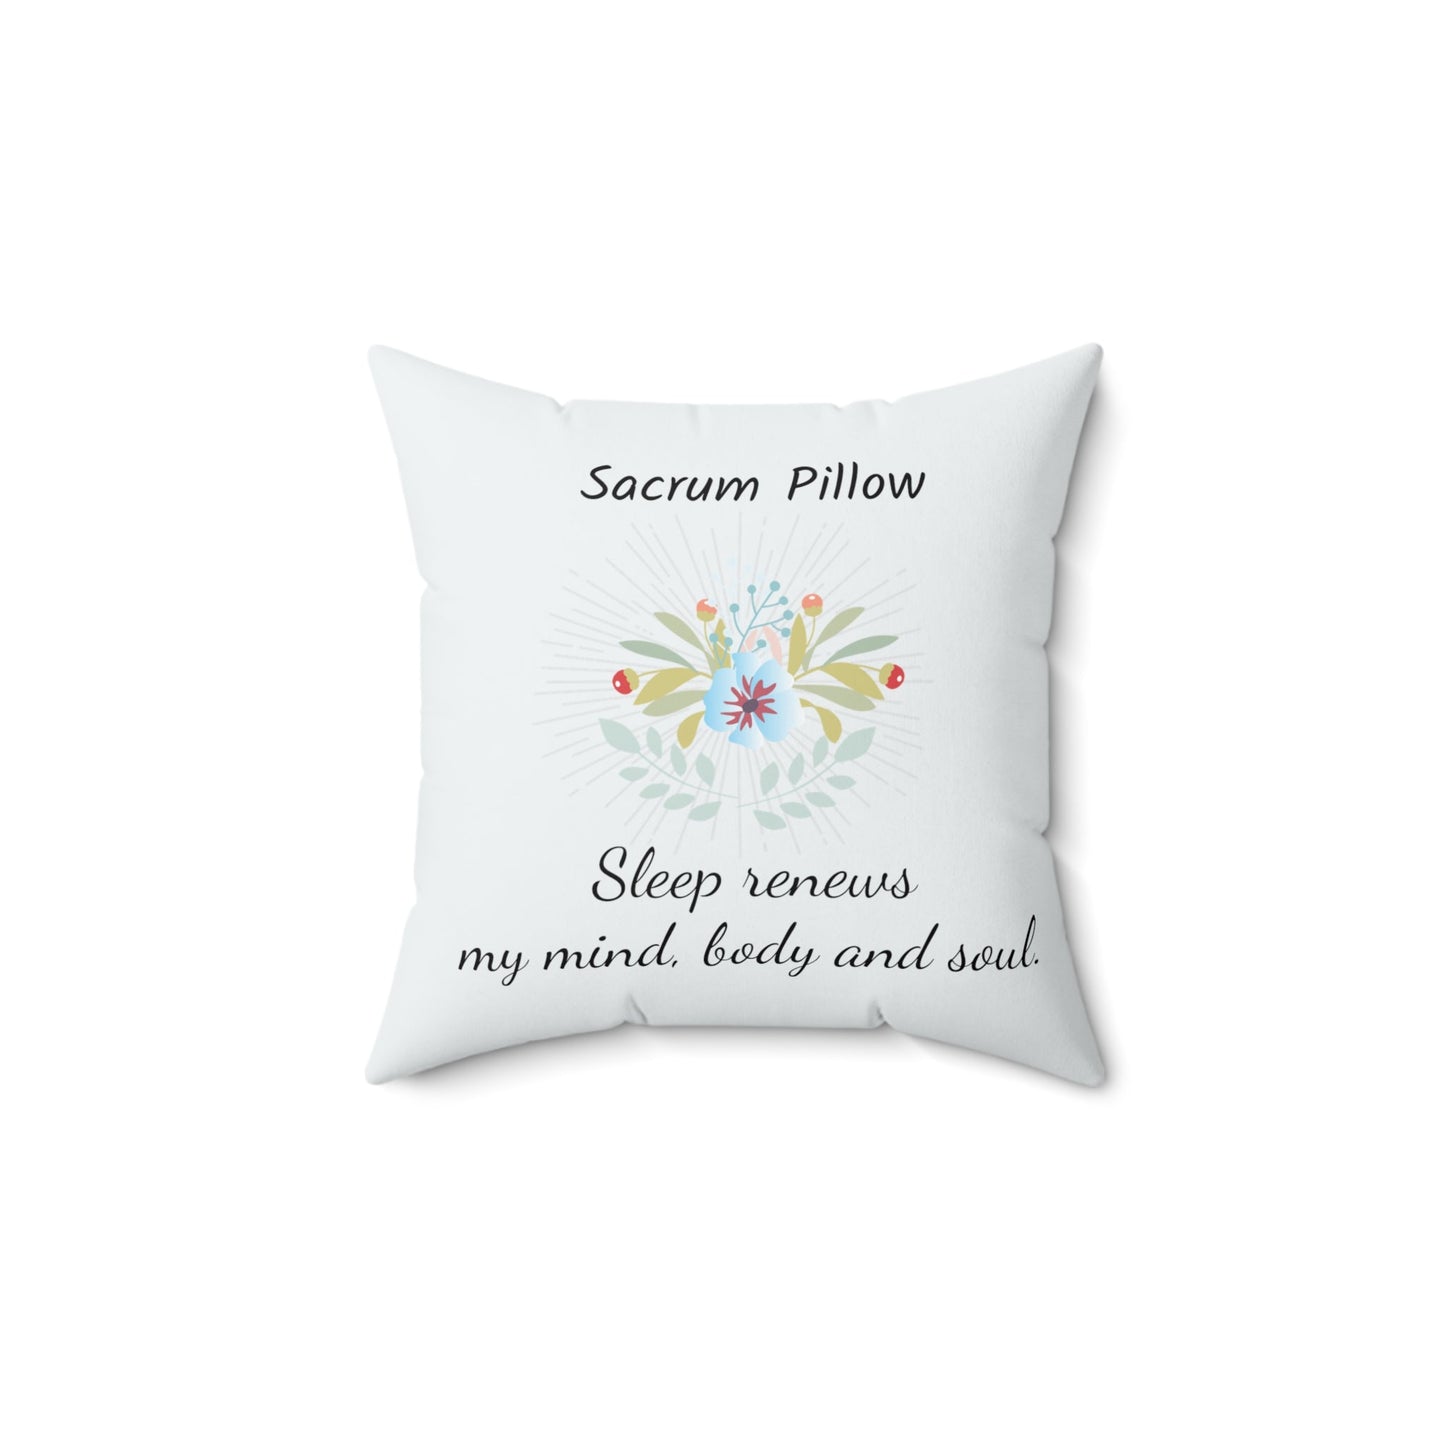 Spun Polyester Square Pillow Case | Sweet Gorgeous Promotions